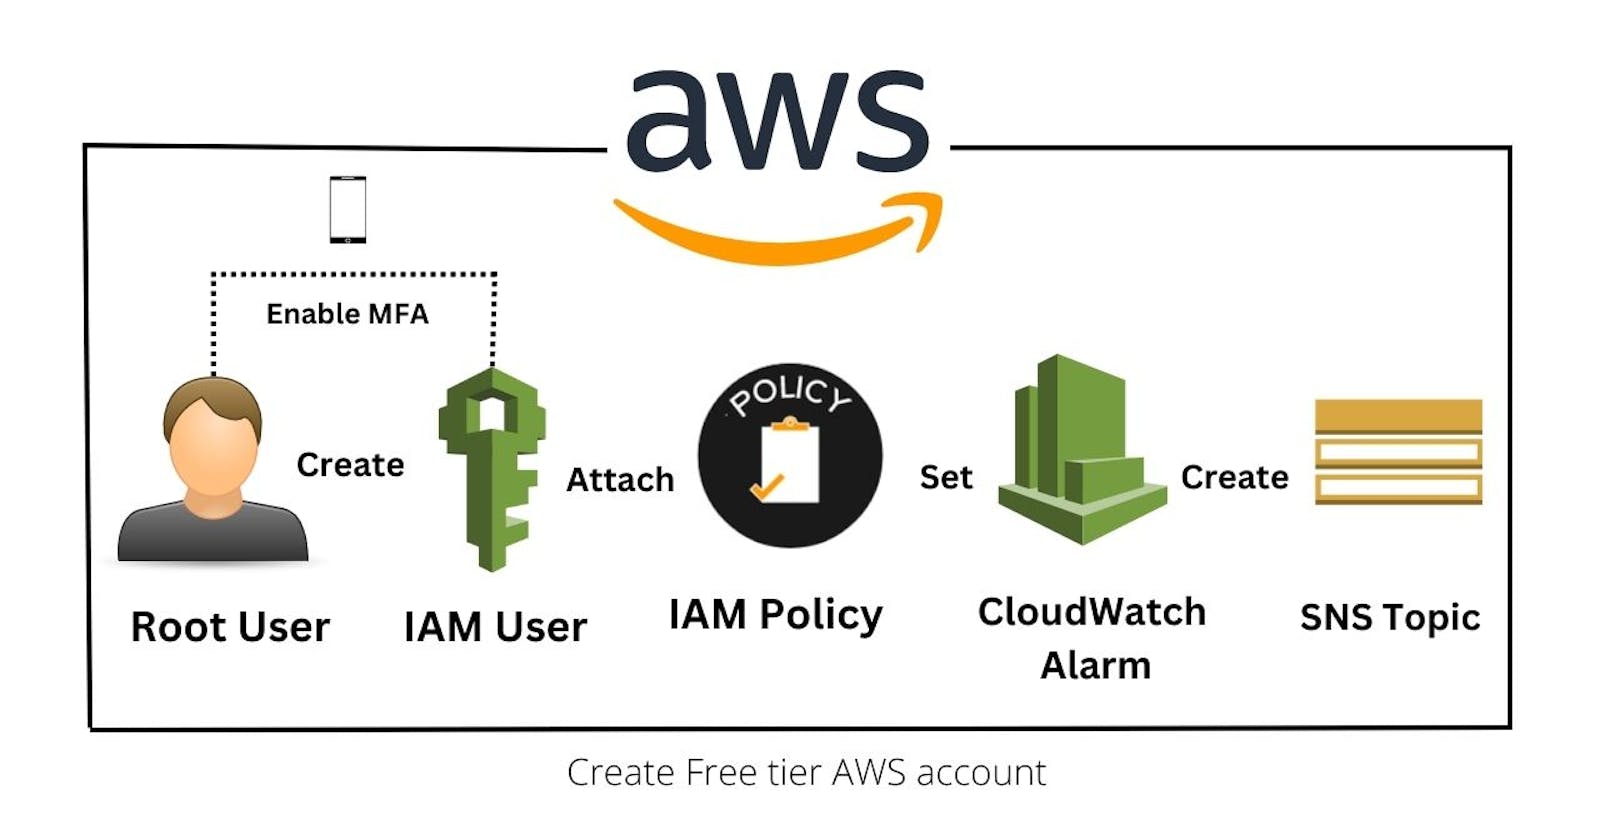 Create free tier AWS account, create IAM user and set CloudWatch alarm for billing